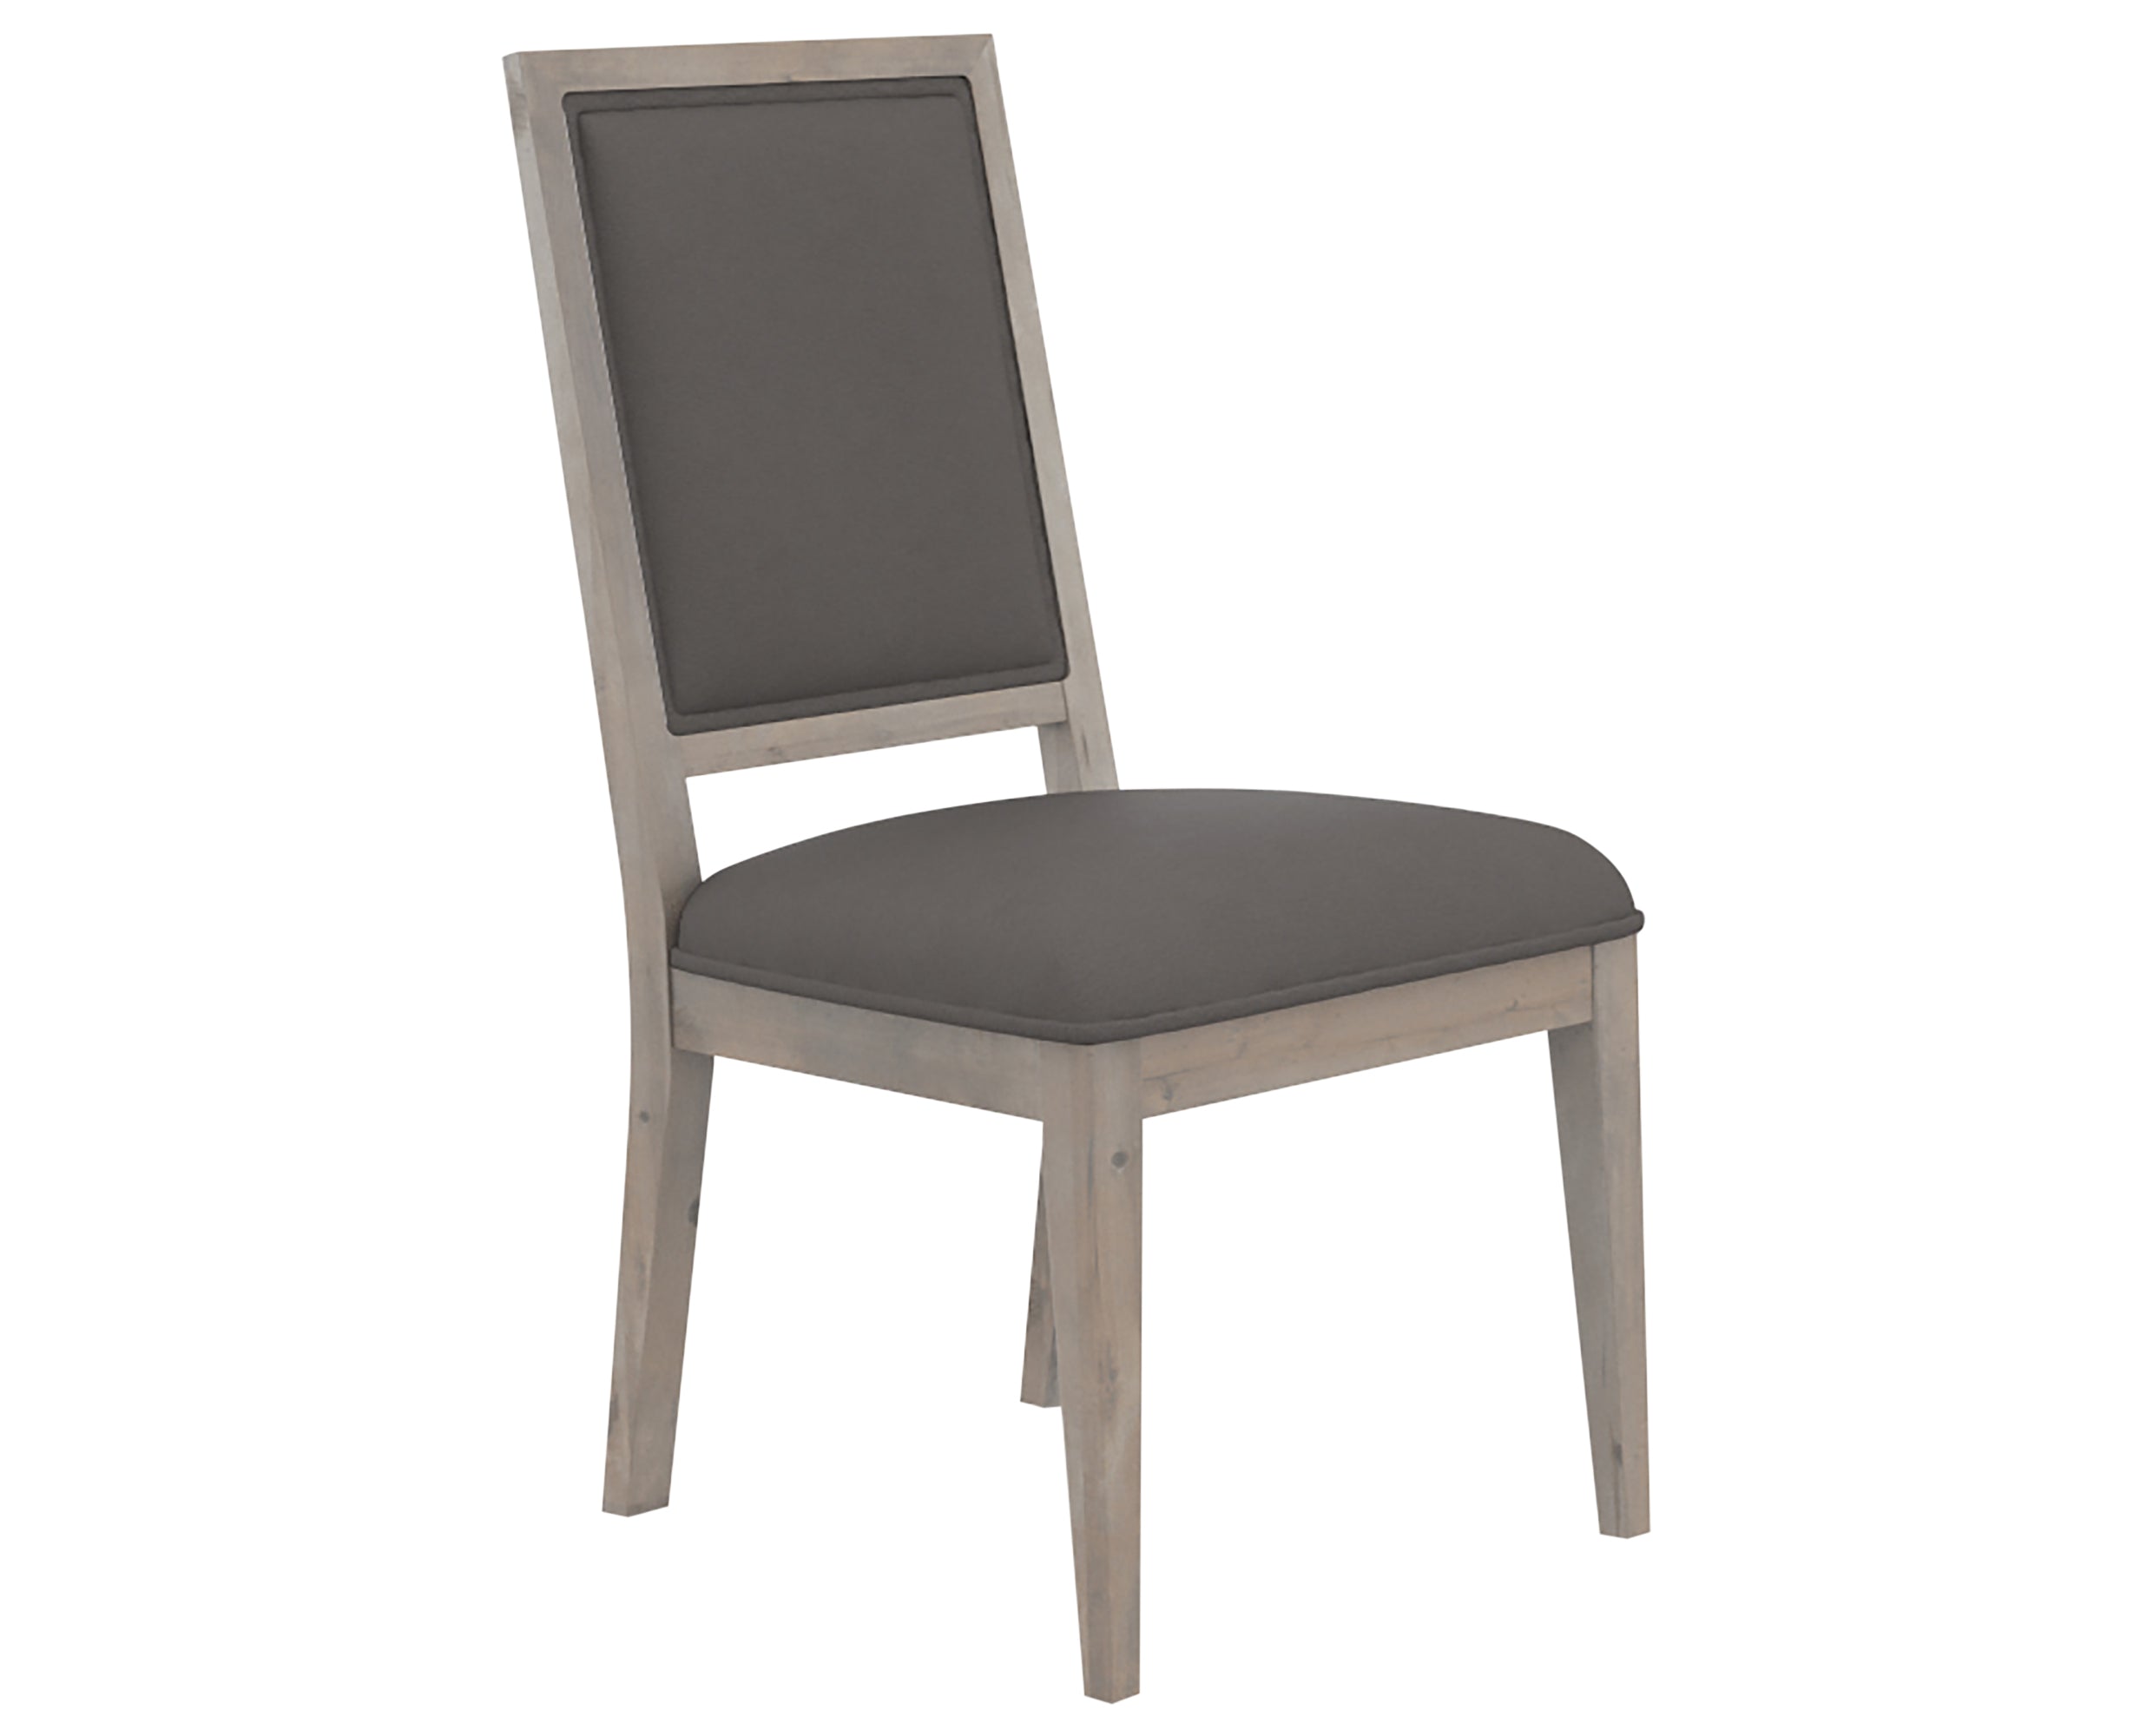 Shadow &amp; Faux Leather XU | Canadel Loft Dining Chair 312 | Valley Ridge Furniture